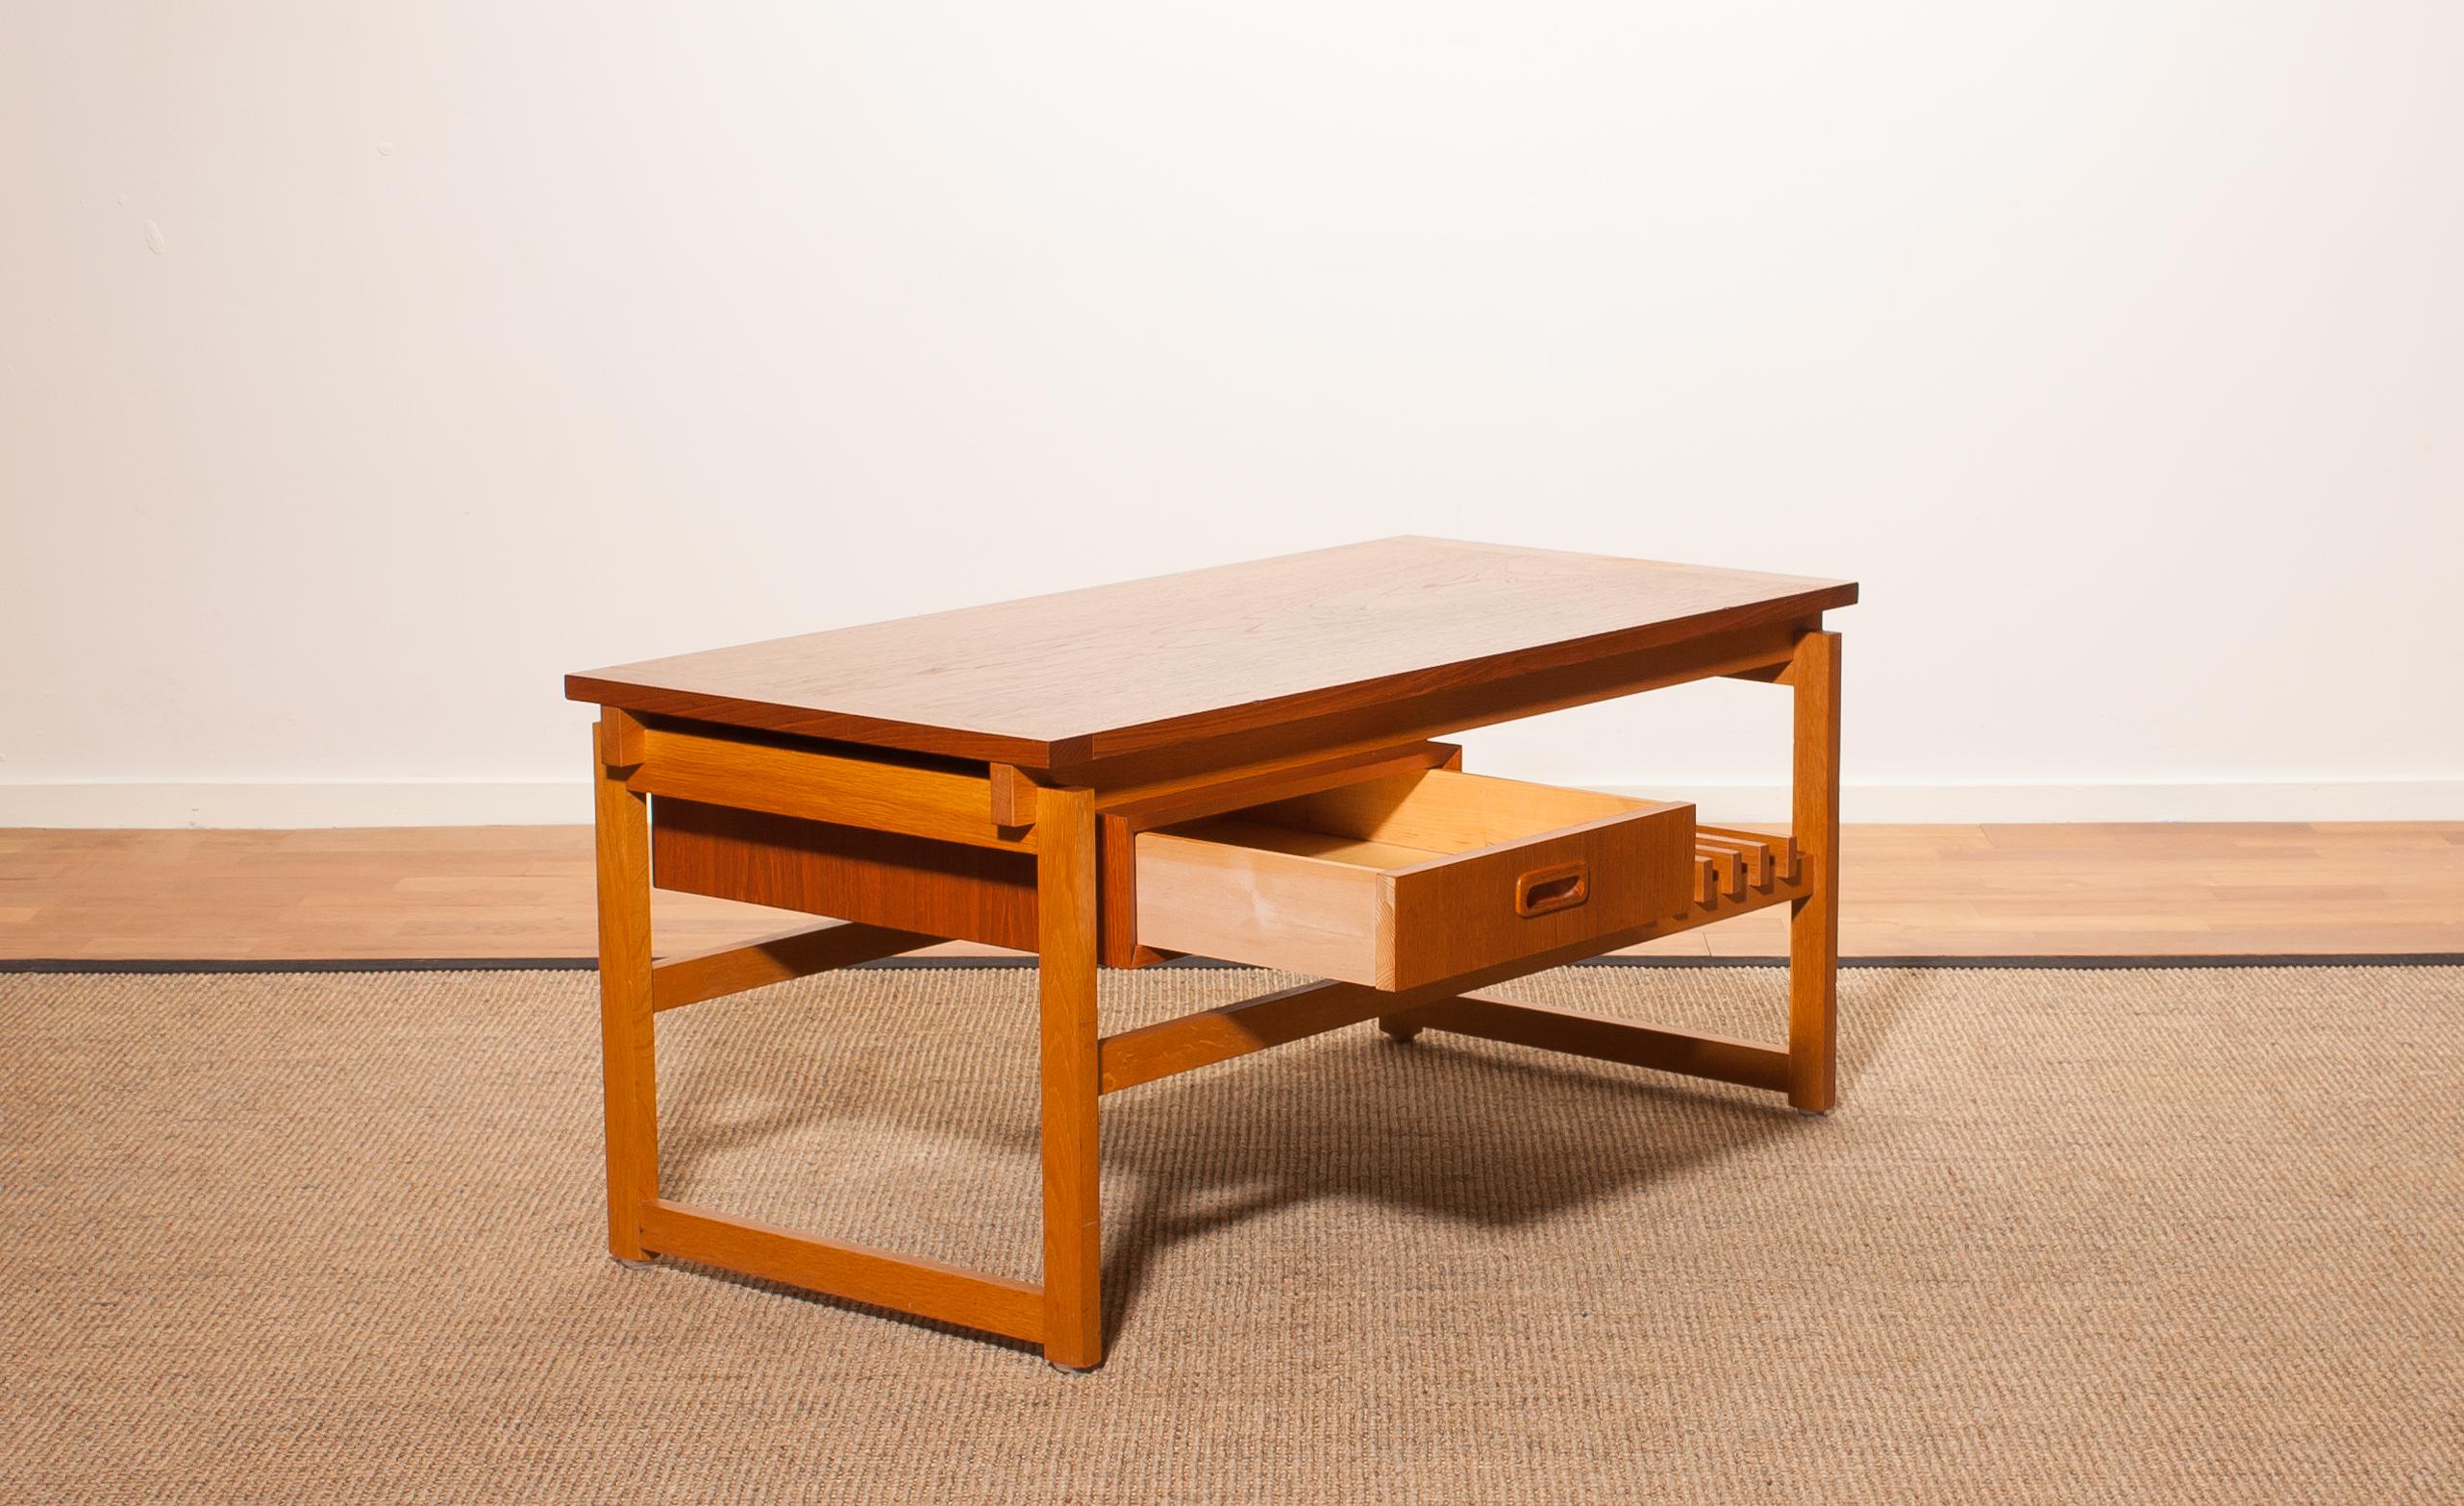 Beautiful coffee table made in Denmark.
This side table is made of teak and has a drawer and a magazine rack.
It is in a very nice condition.
Period 1950s
Dimensions: H 45 cm, W 100 cm, D 48 cm.